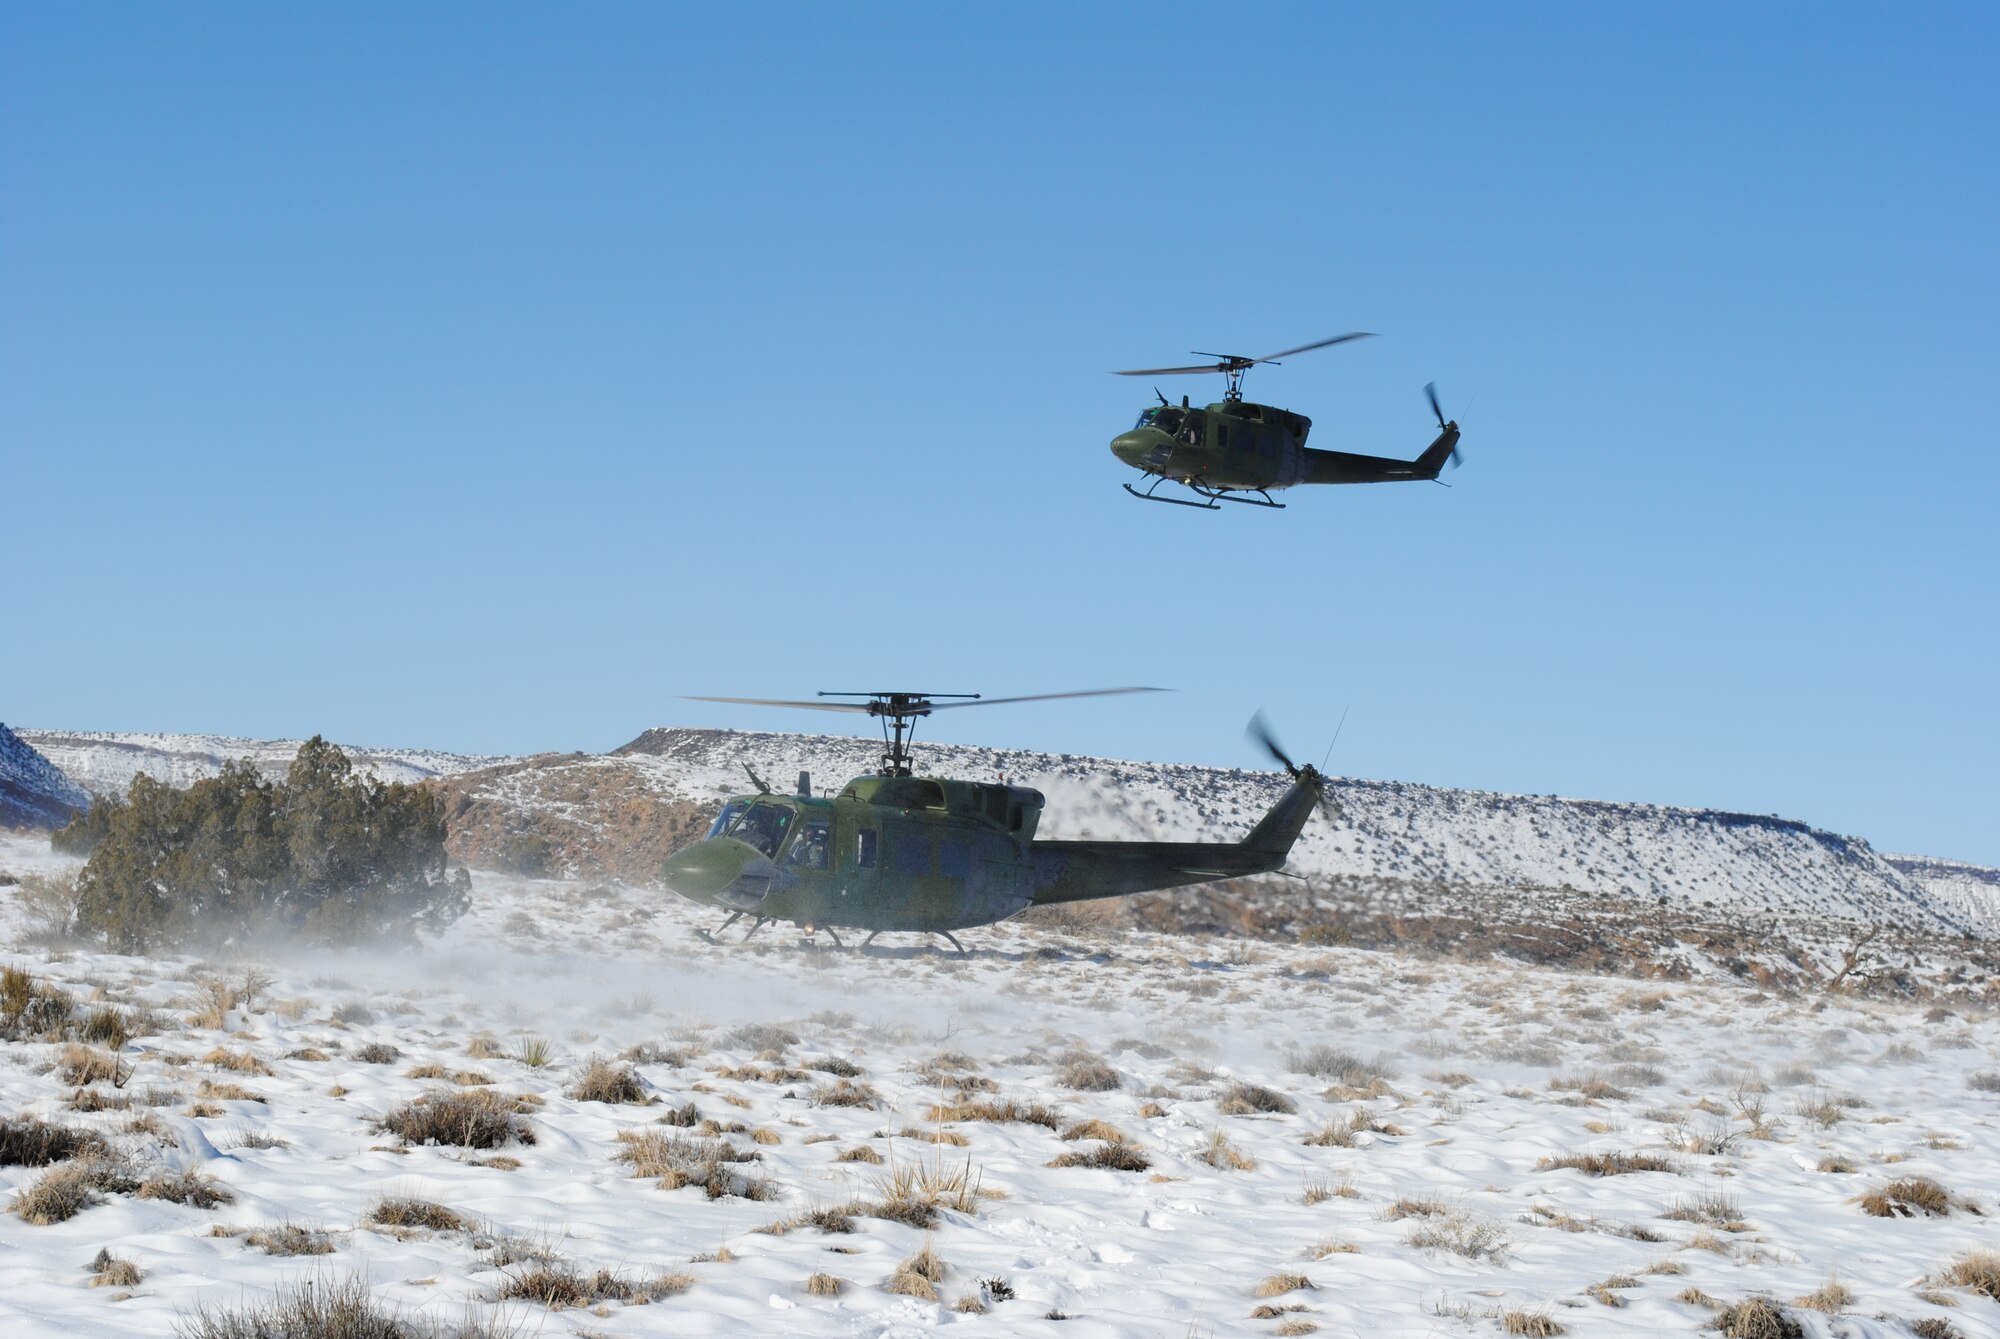 A UH-1N assigned to the 512th Rescue Squadron lands while another hovers overhead Dec. 27. U.S. Air Force Photo by John Cochran.